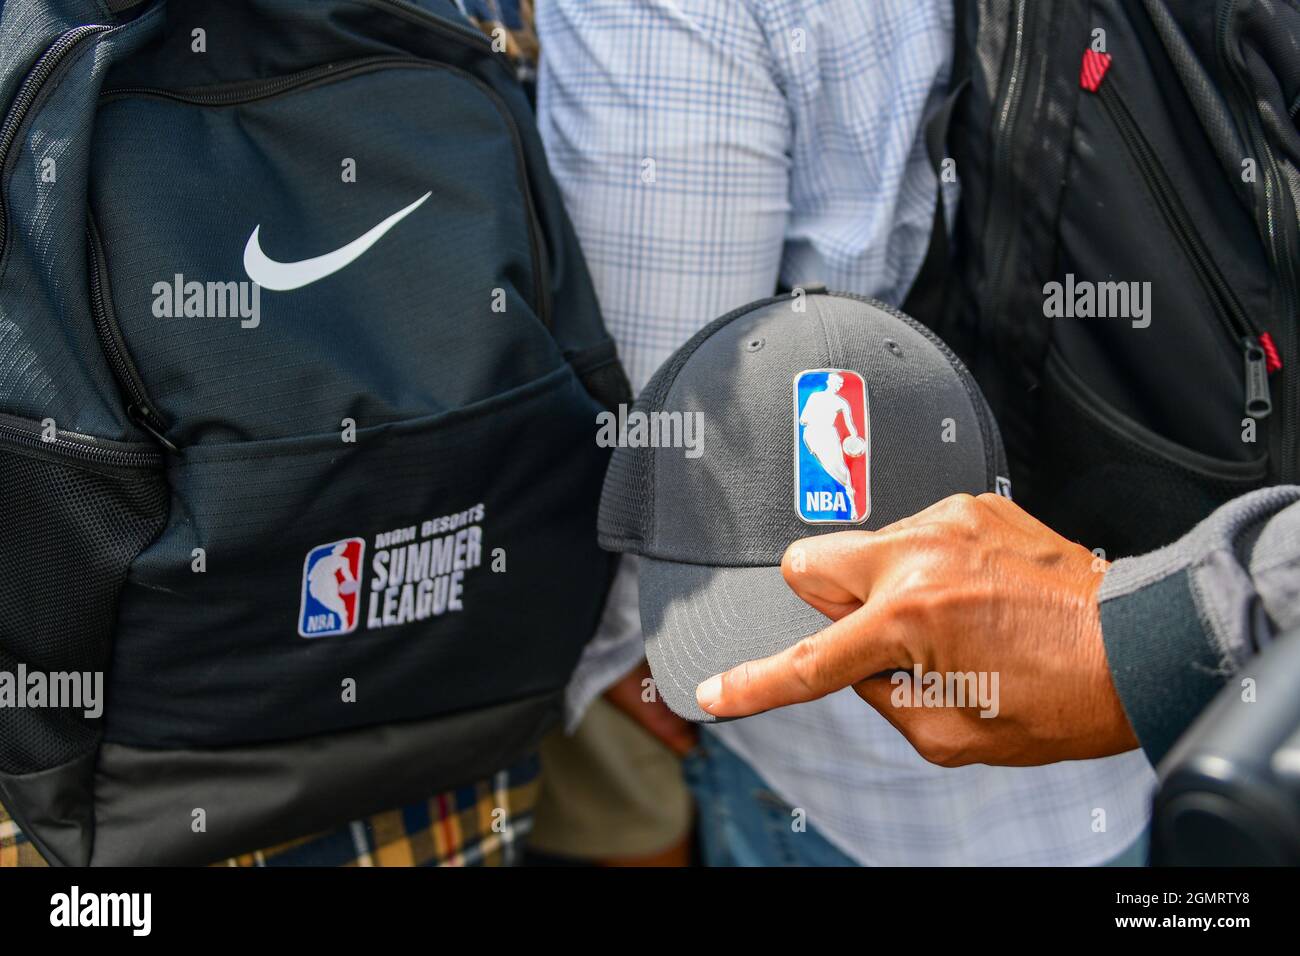 A photographer holds a hat with the NBA logo next to a Nike backpack embroidered with NBA Summer League during a groundbreaking ceremony for the new h Stock Photo